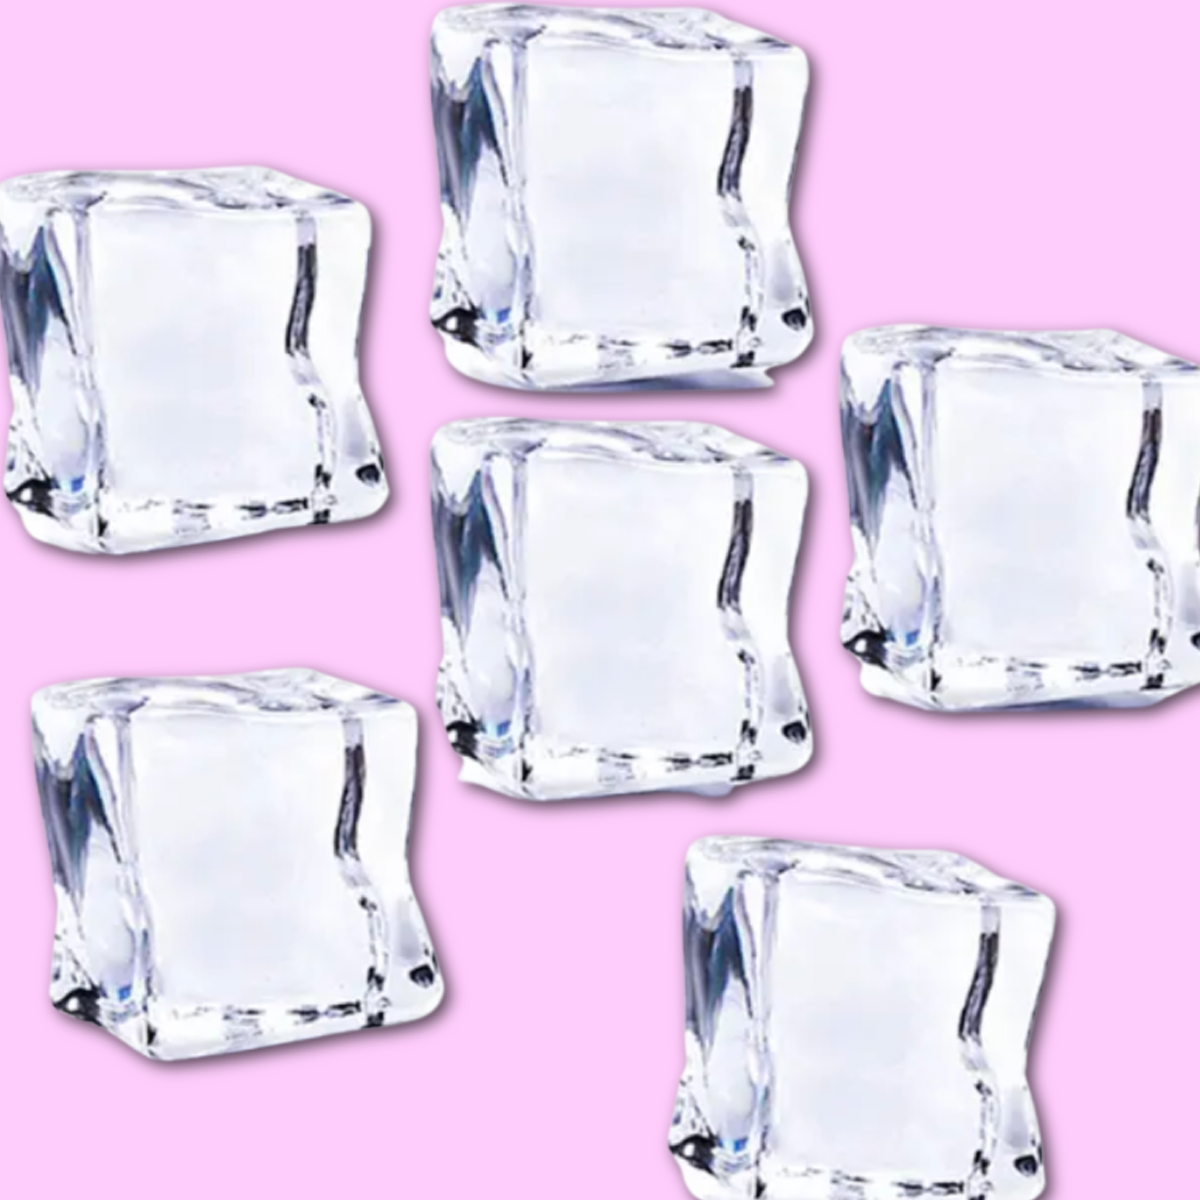 Ice Cube Slime Charms - 30pcs